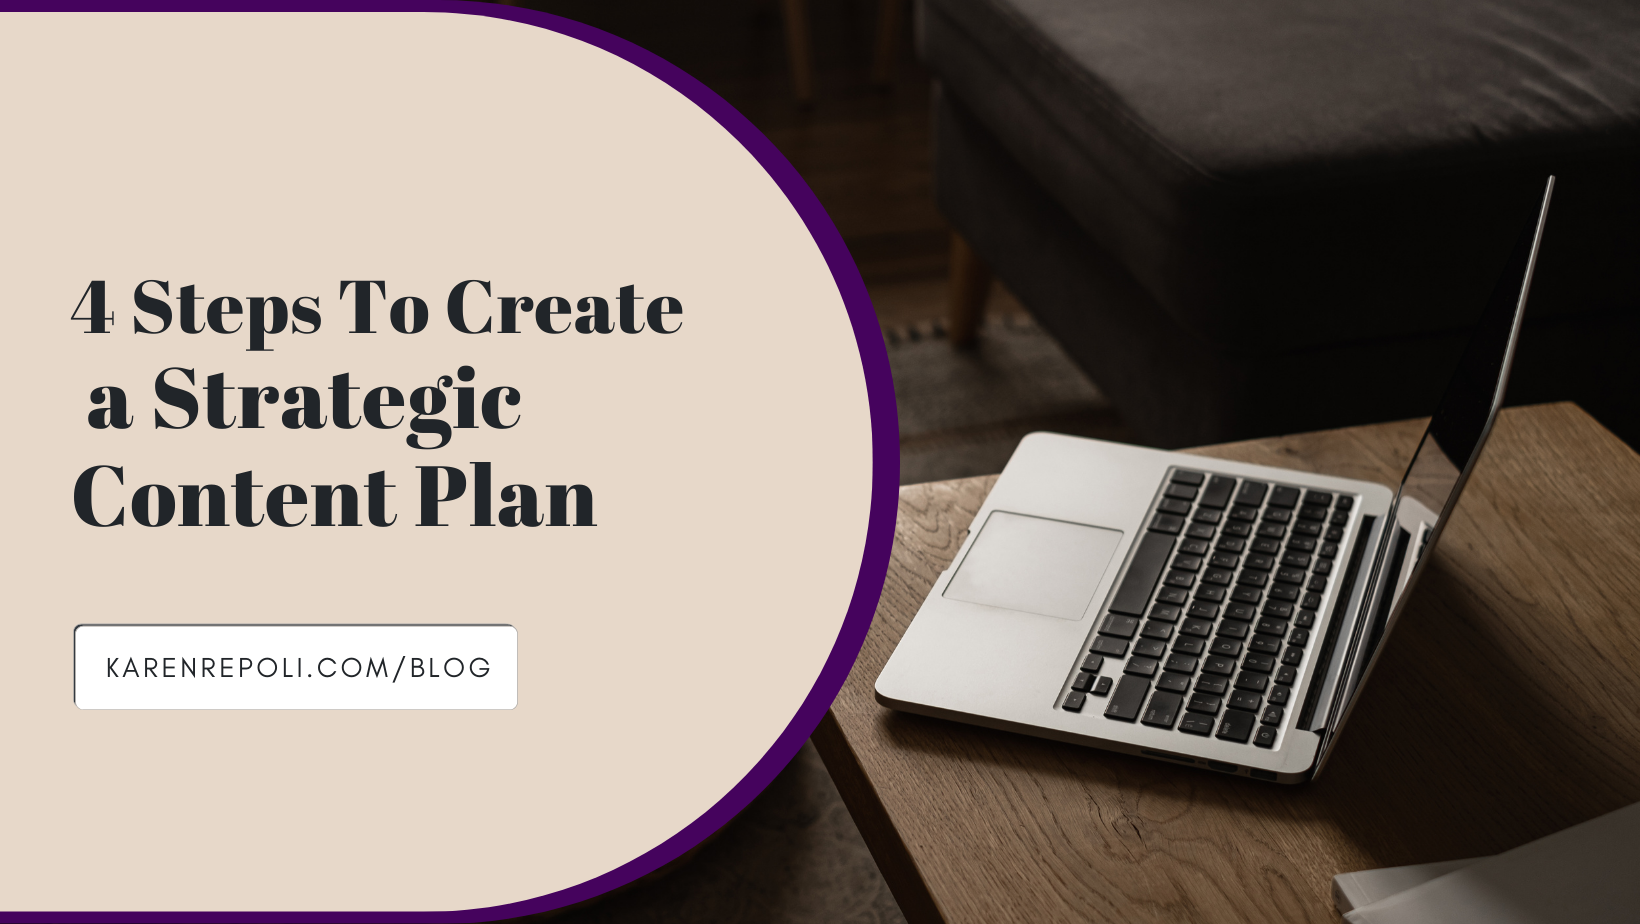 4 Steps To Create a Strategic Content Plan